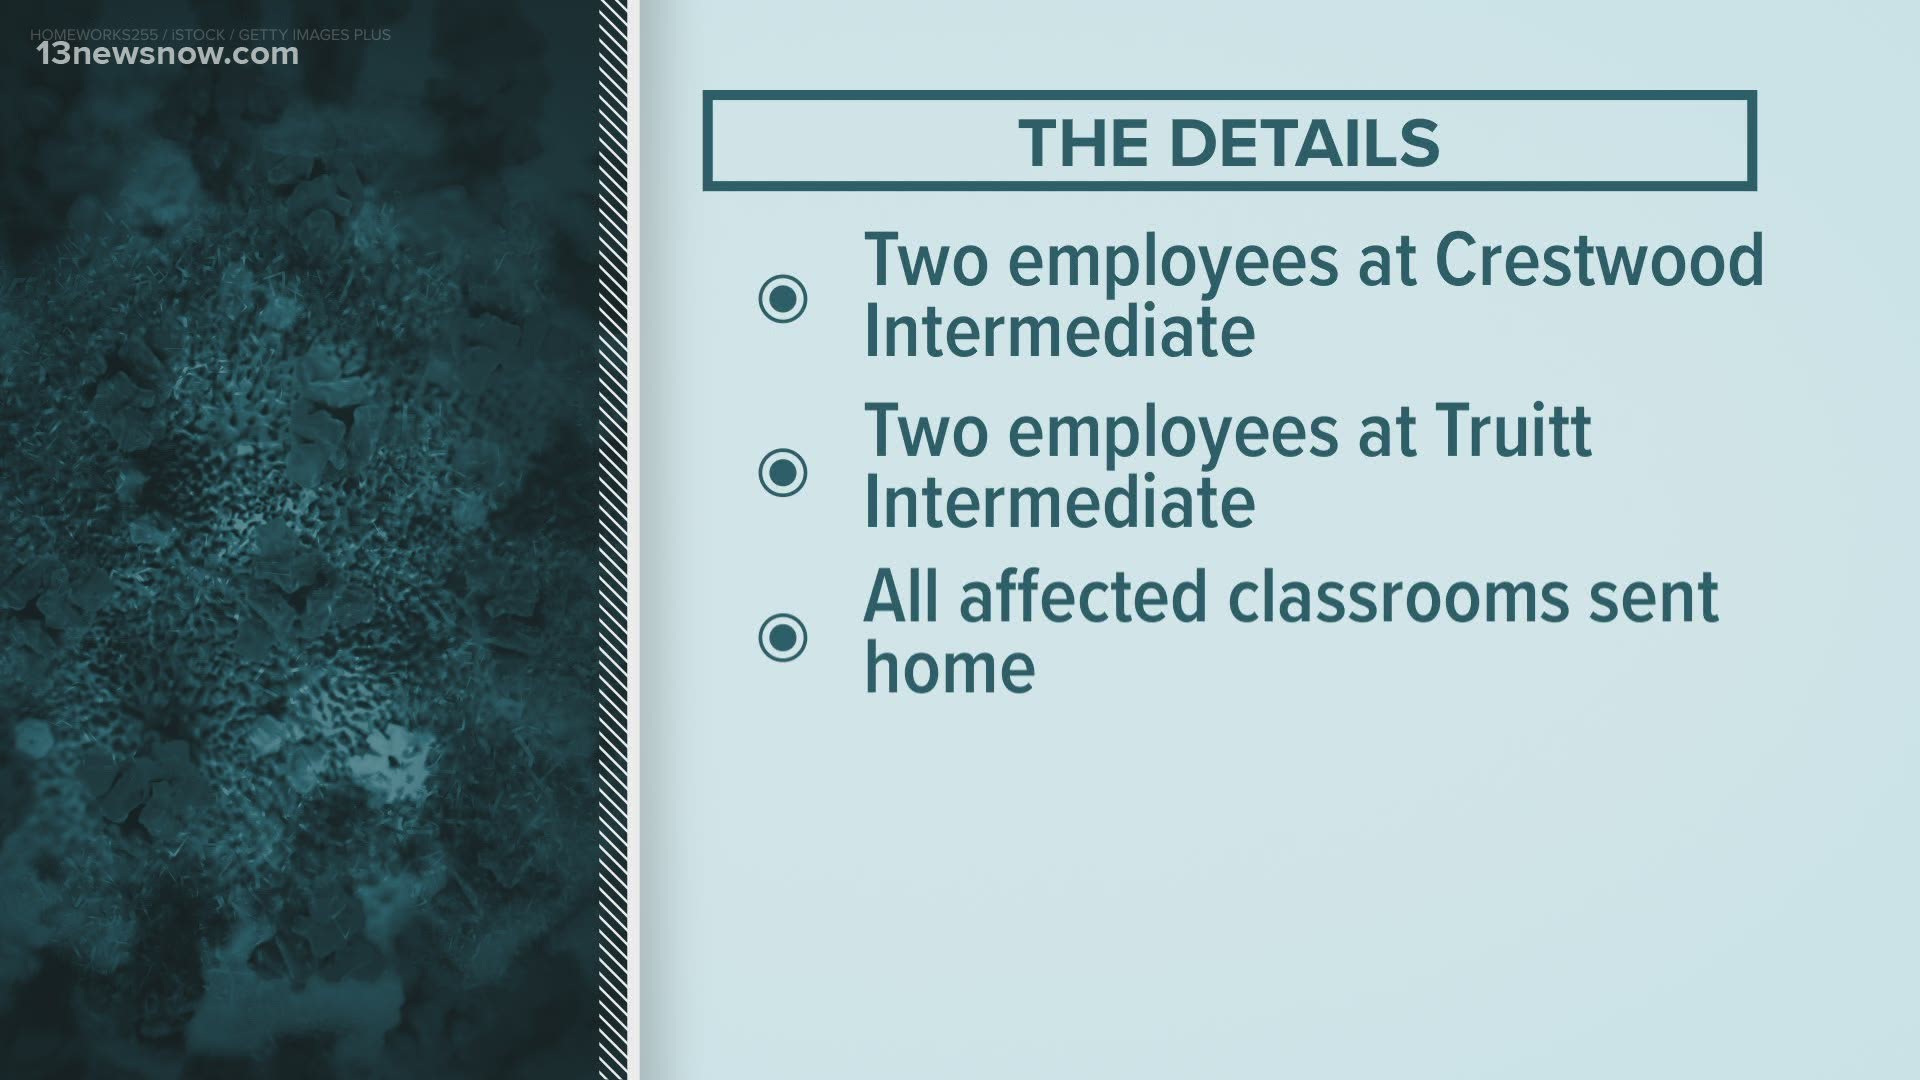 School leaders say two employees each at Crestwood and Truitt intermediate schools have tested positive since mid-November.